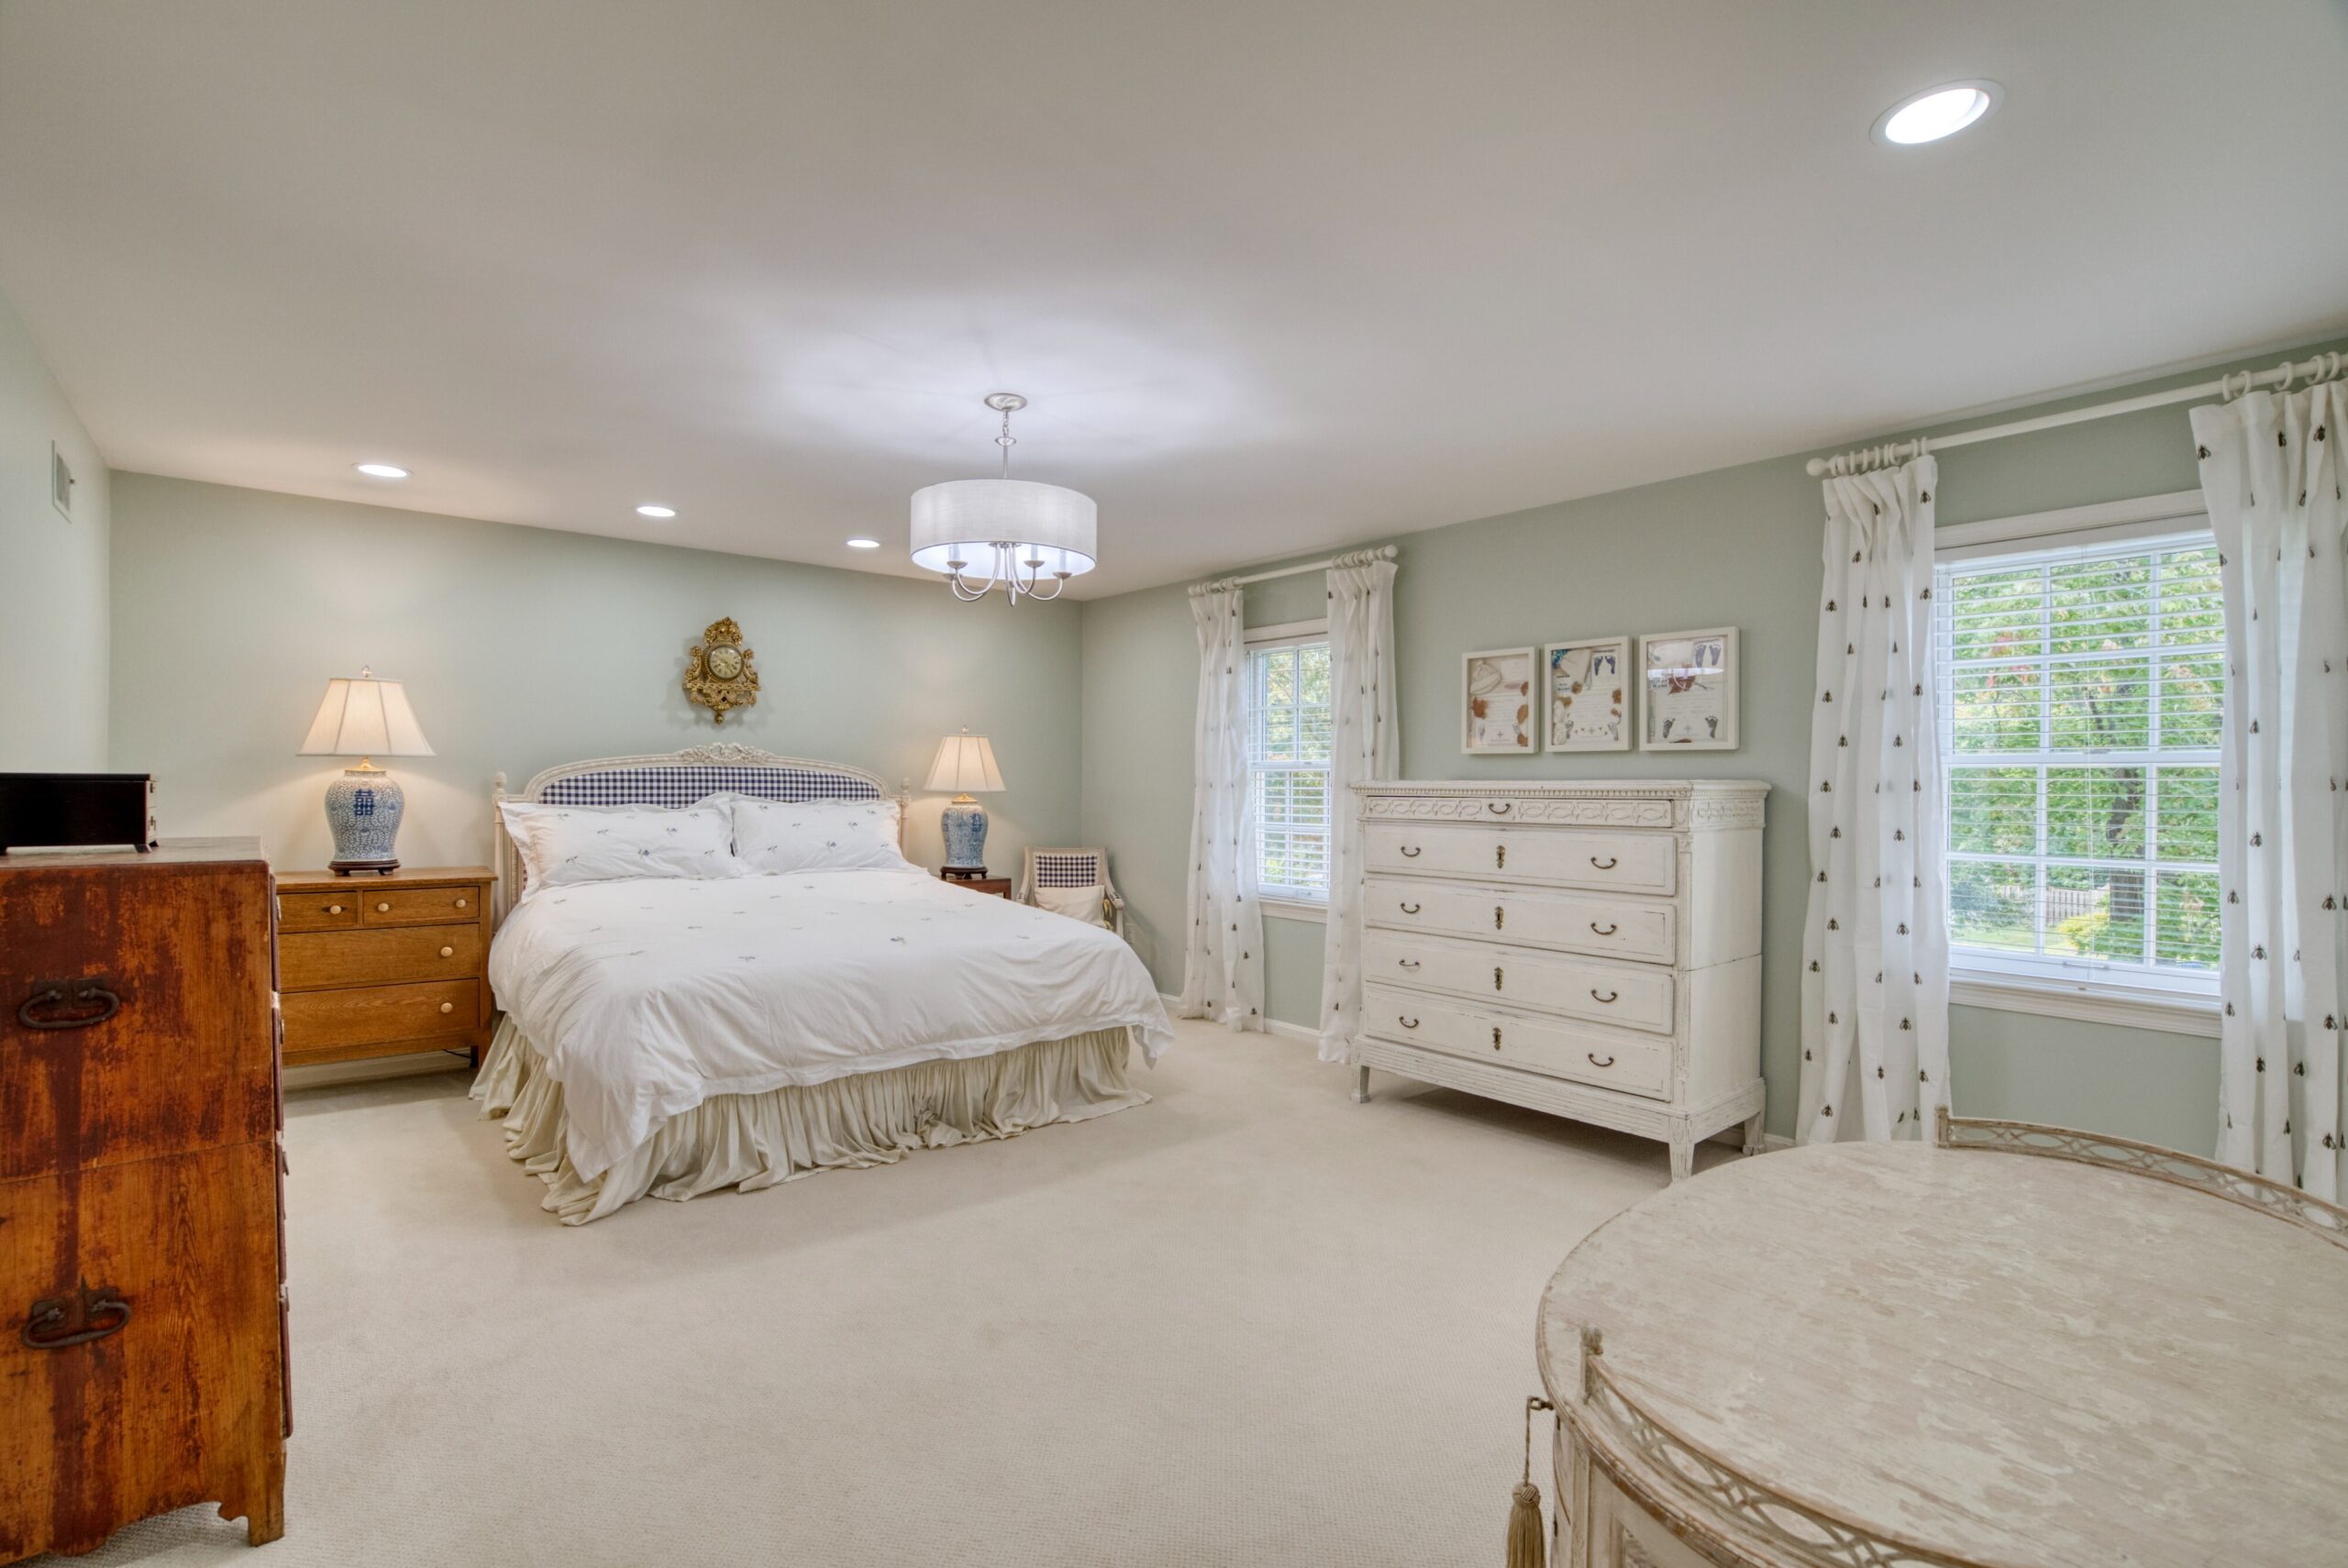 Professional interior photo of 8305 River Falls Dr, Potomac, MD - showing brightly lit master bedroom